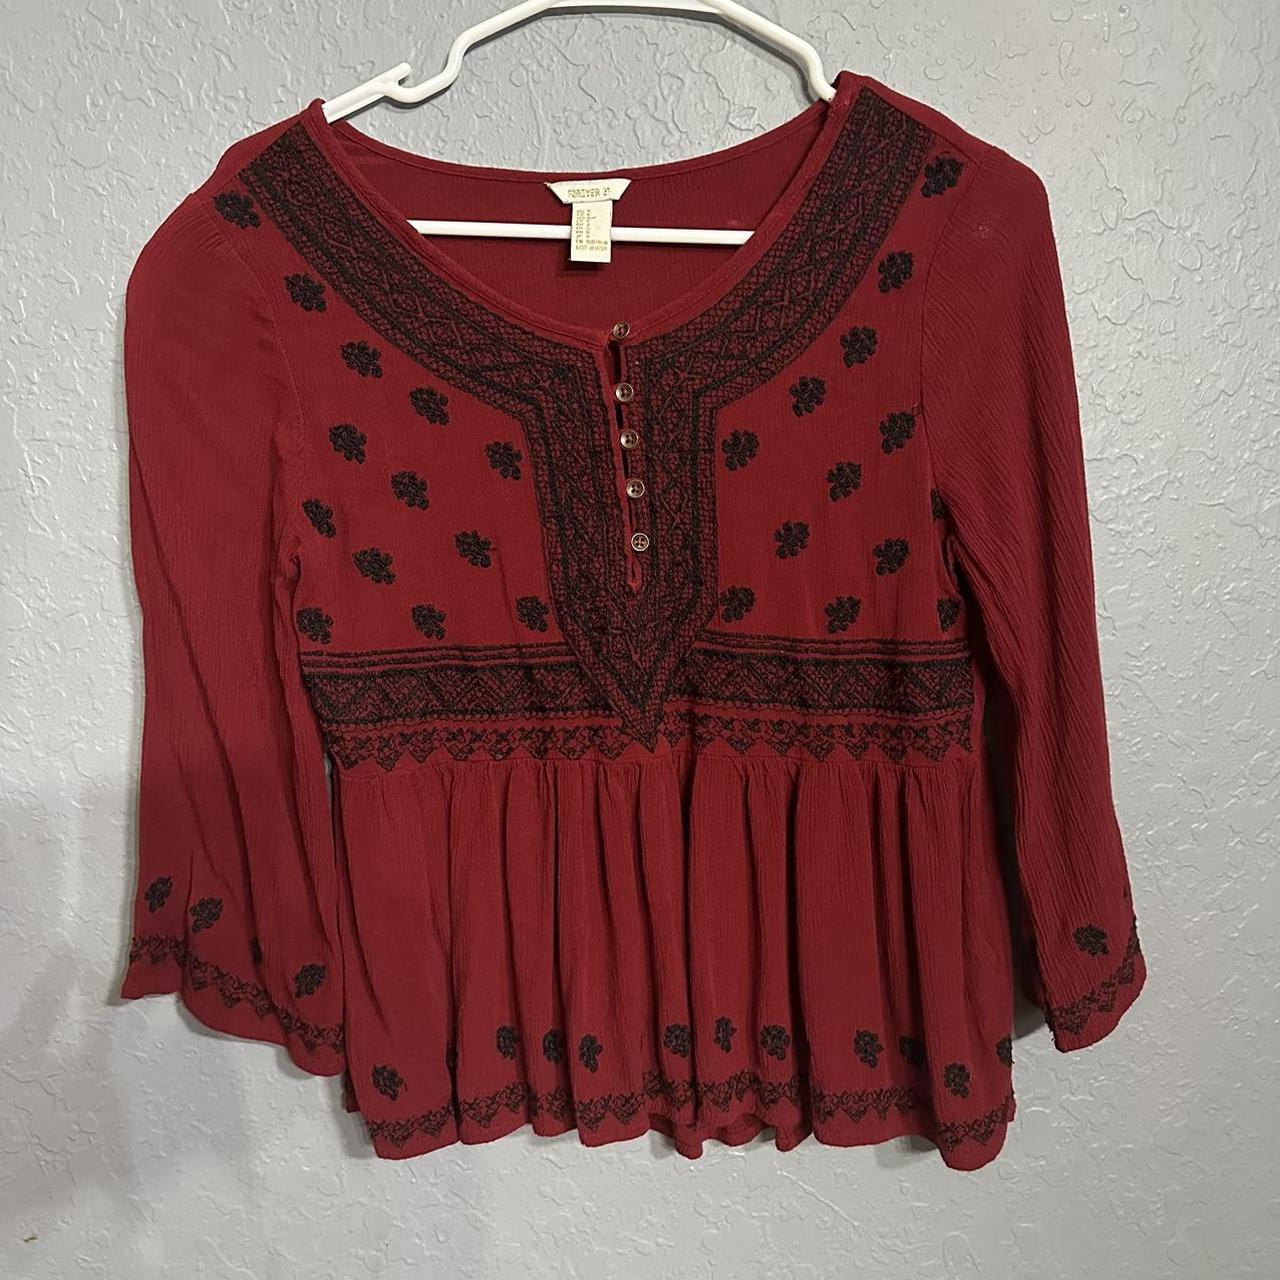 Forever 21 Bell Sleeve Peasant Top Size Small Dark... - Depop